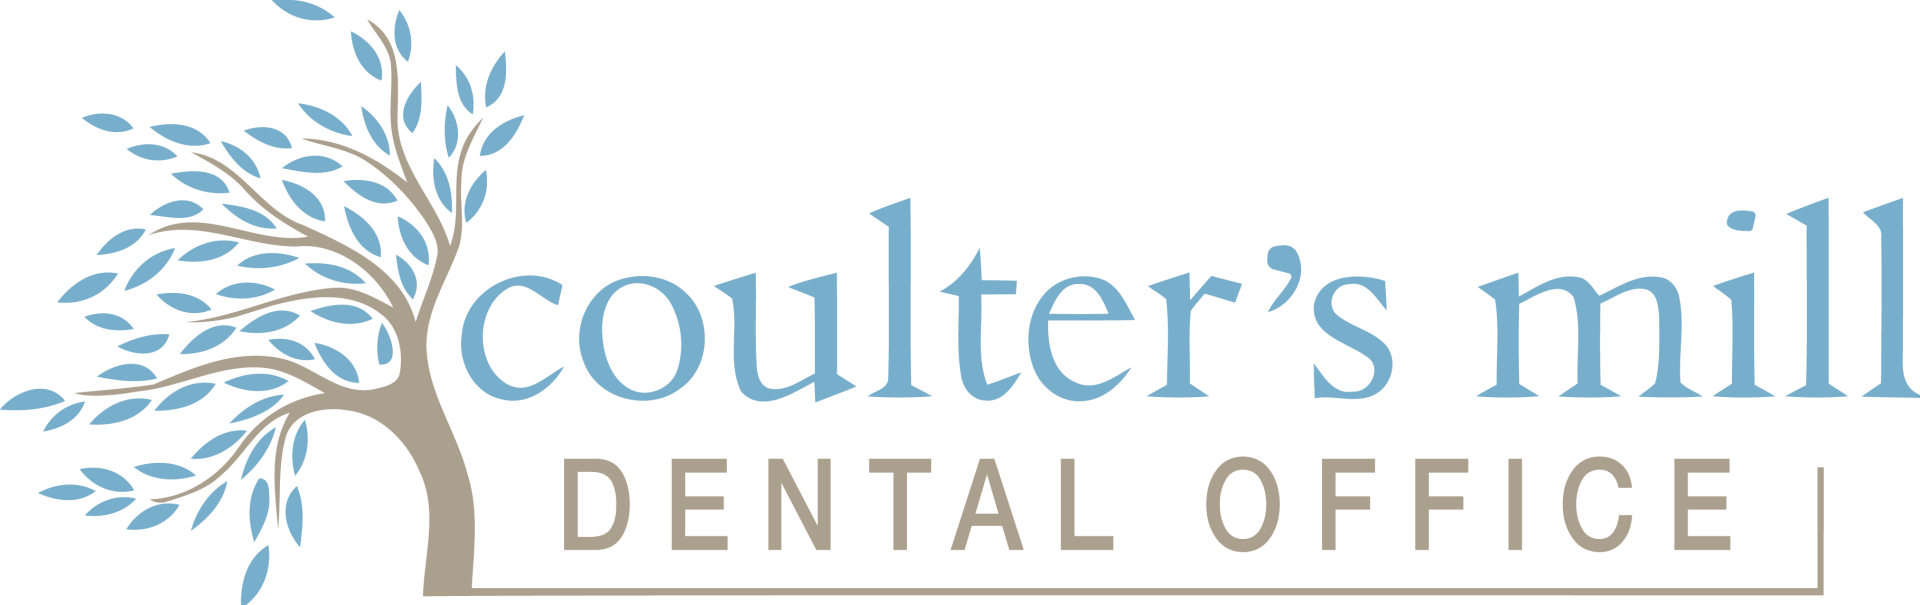 Coulter's Mill Dental Office Logo | Dentist in Thornhill, ON